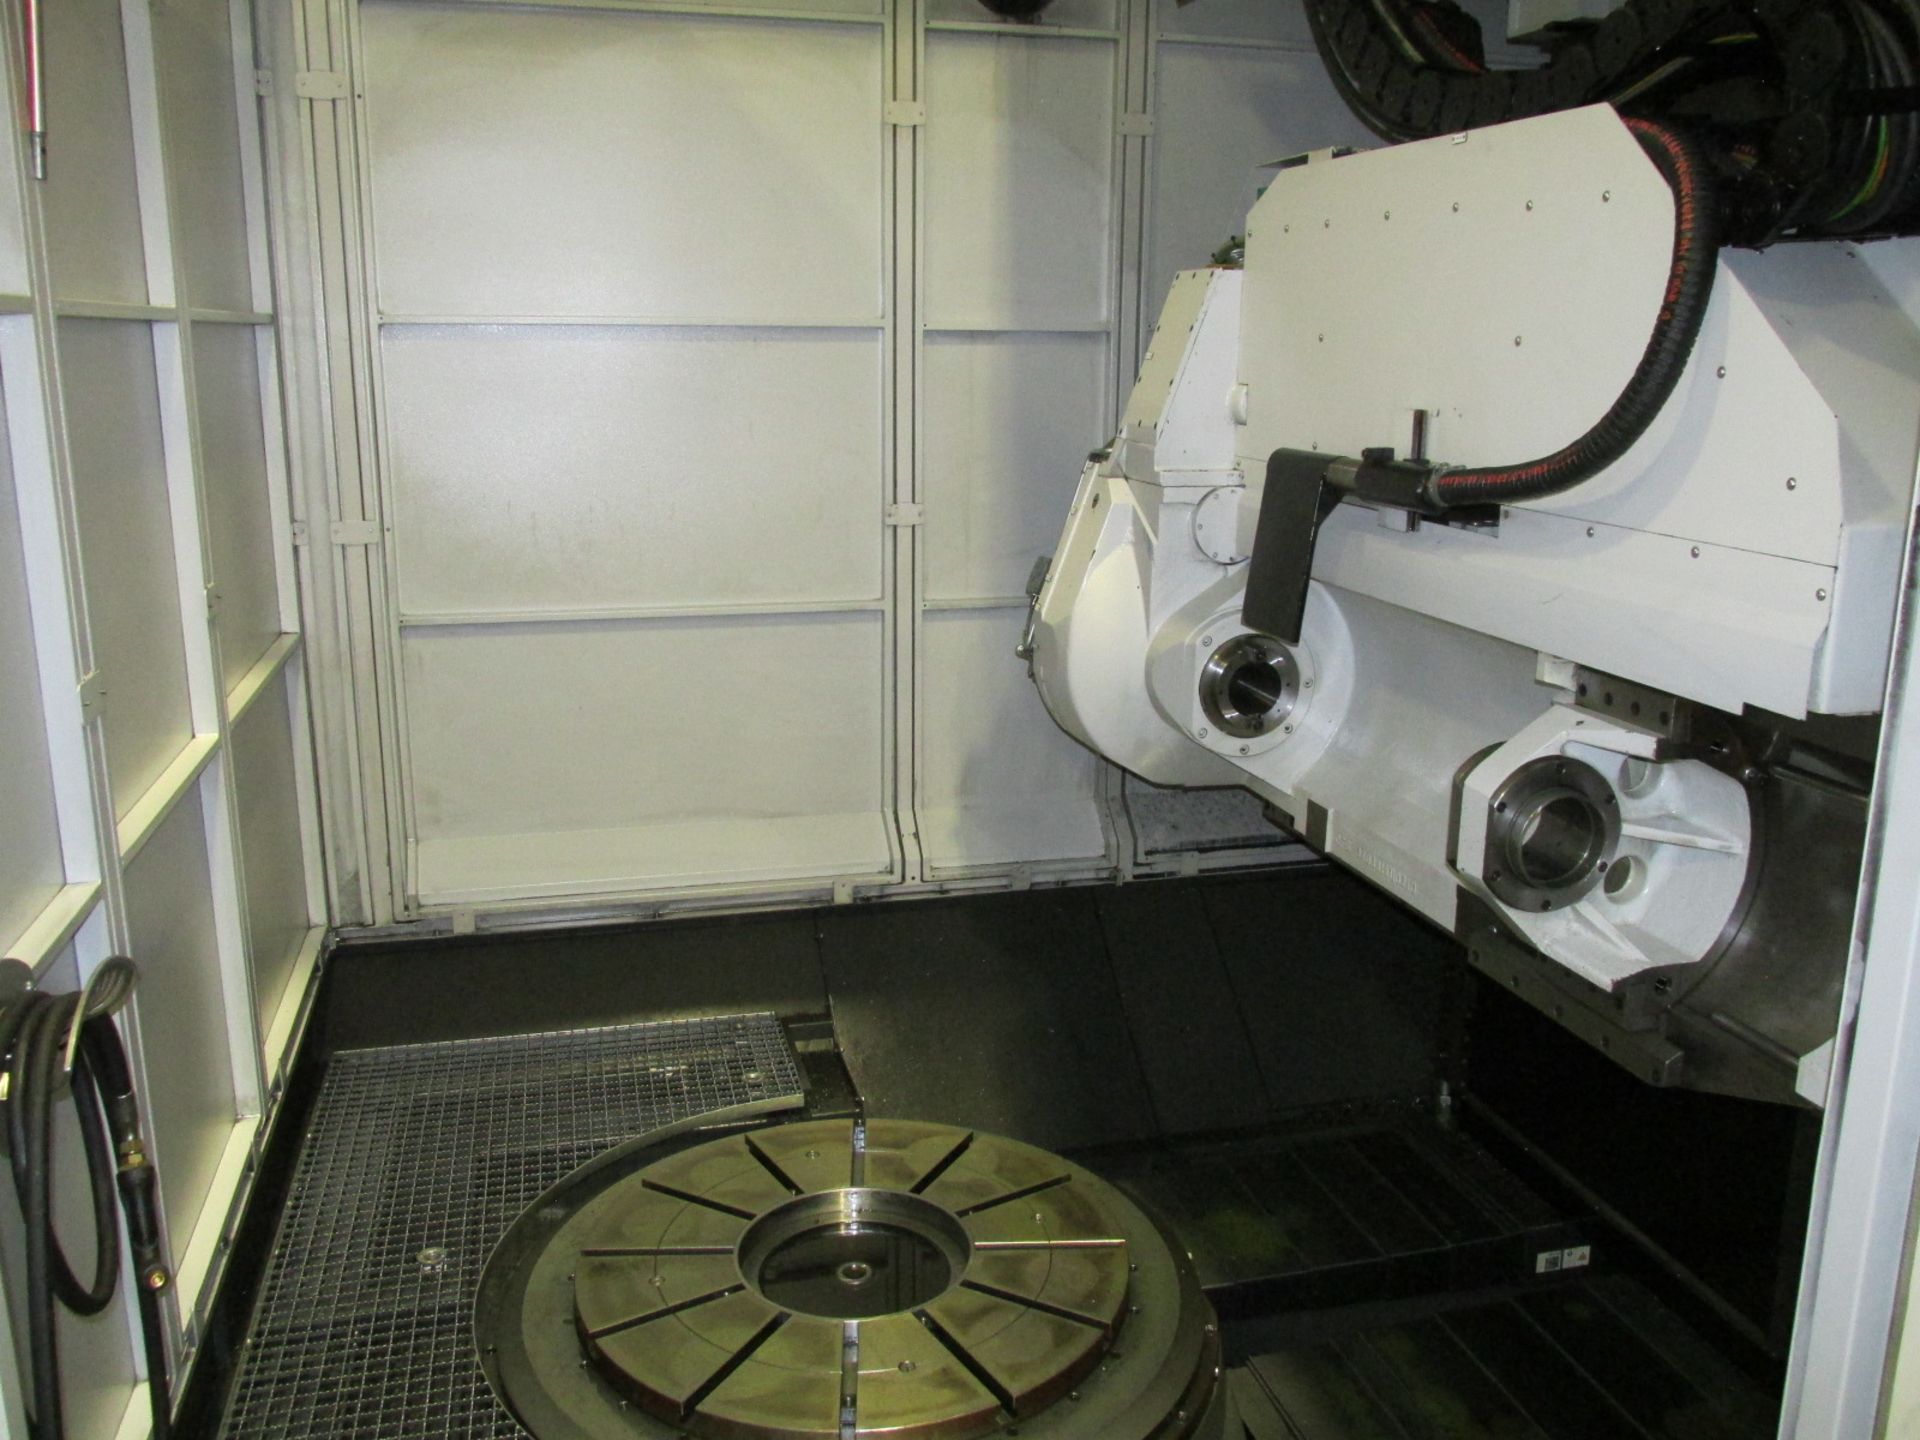 MAG Modul H 1500 CNC 6-Axis Gear Hobbers - New 2013, Extremely Low Hours - Image 3 of 8